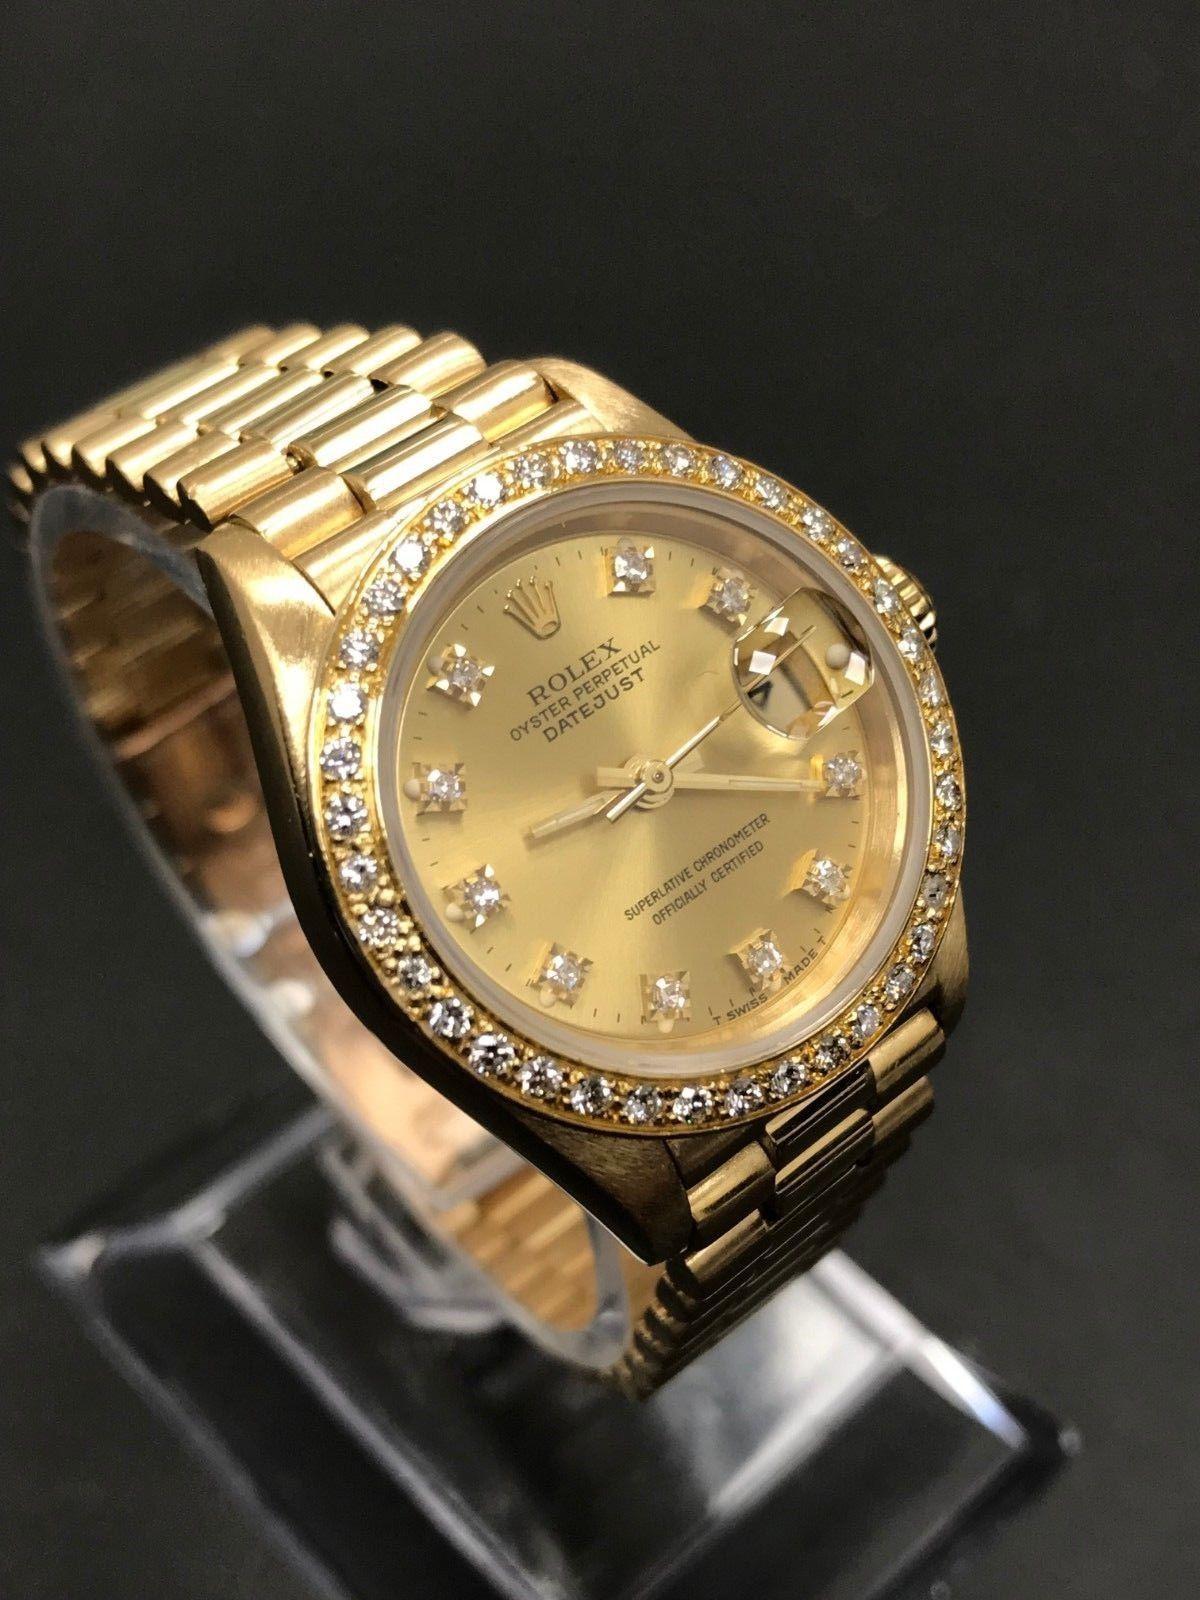 Style Number: 69178
Serial: L395***
Model: Datejust 
Case Material: 18K Yellow Gold 
Band: 18K Yellow Gold
Bezel: Custom Diamond Bezel 
Dial: Custom Diamond Dial 
Face: Sapphire Crystal 
Case Size: 26mm
Includes: 
-Elegant Watch Box
-Certified